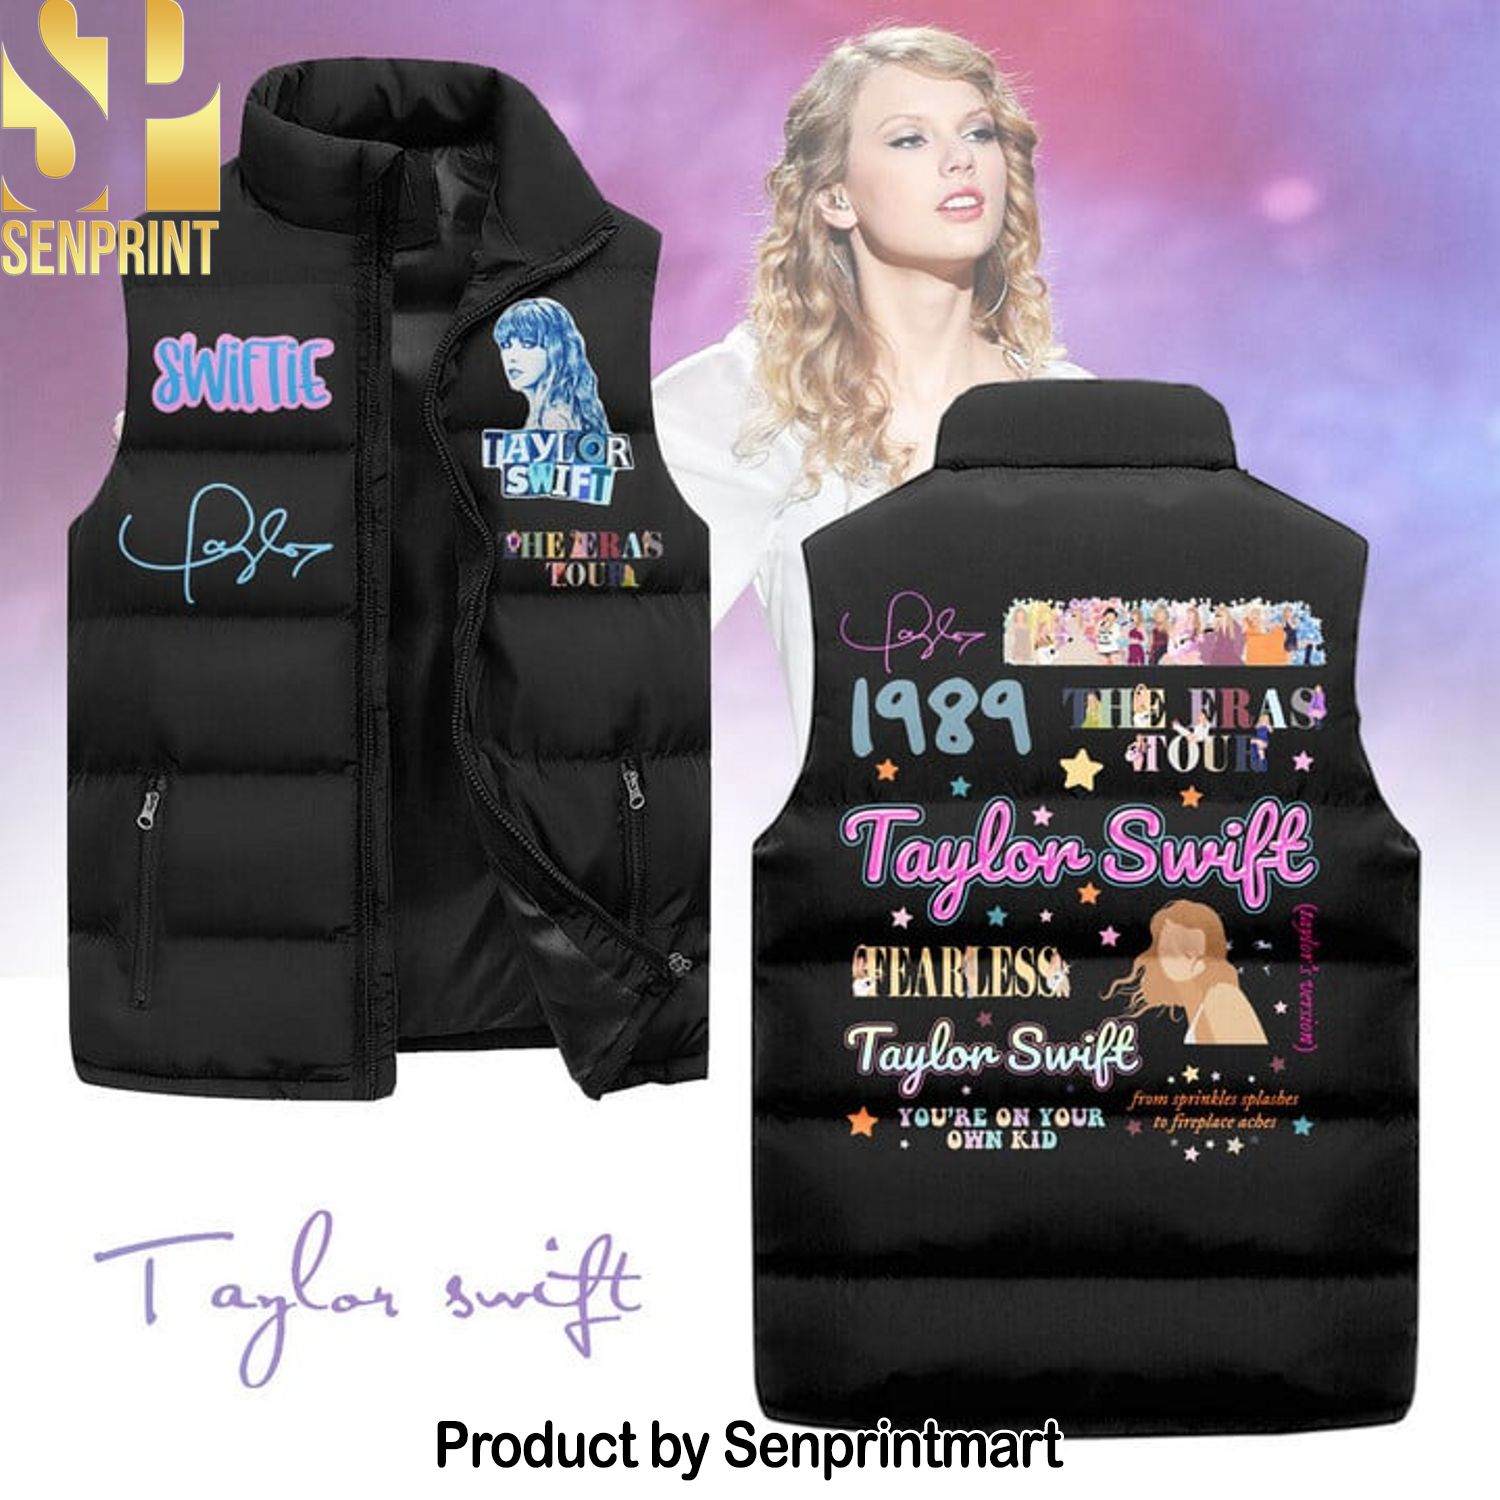 Taylor Swift Music Best Outfit Sleeveless Jacket